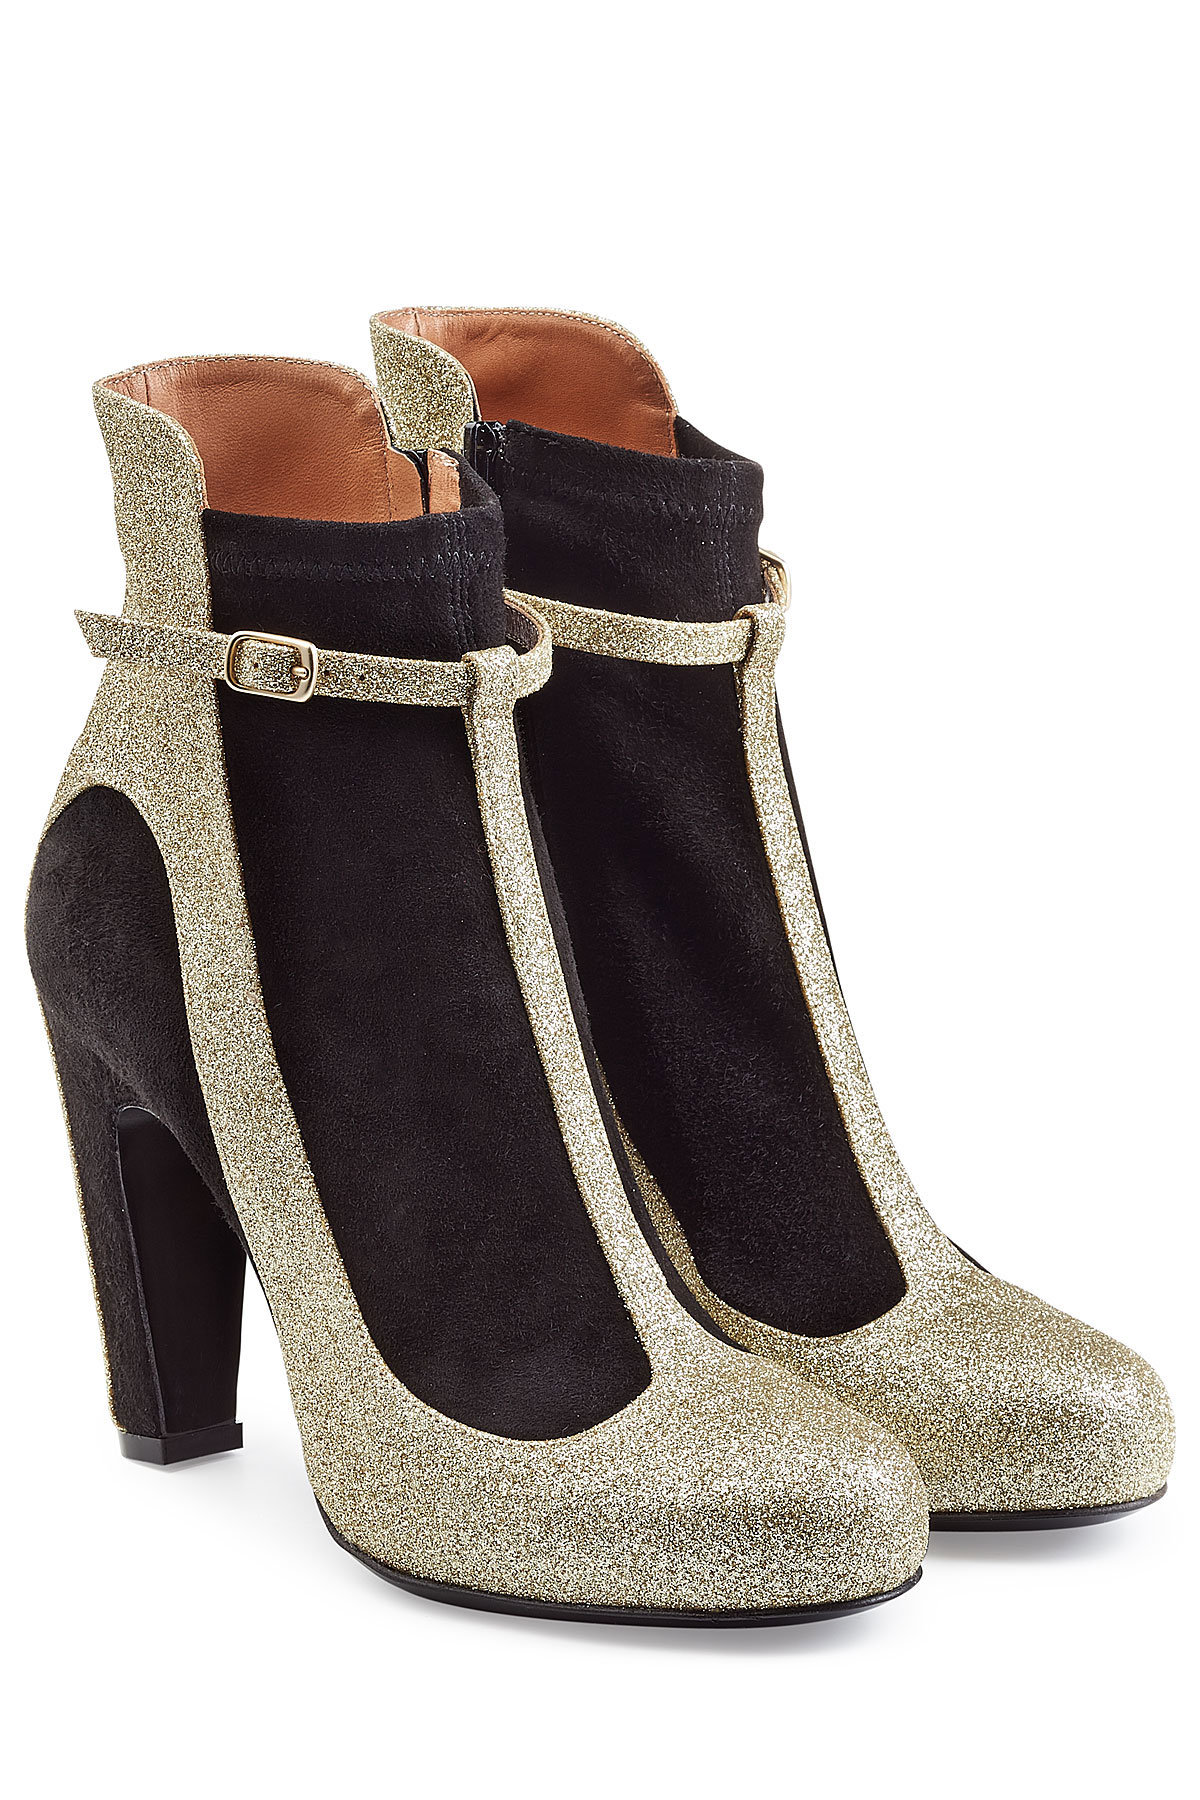 Maison Margiela - Glitter and Suede Ankle Boots